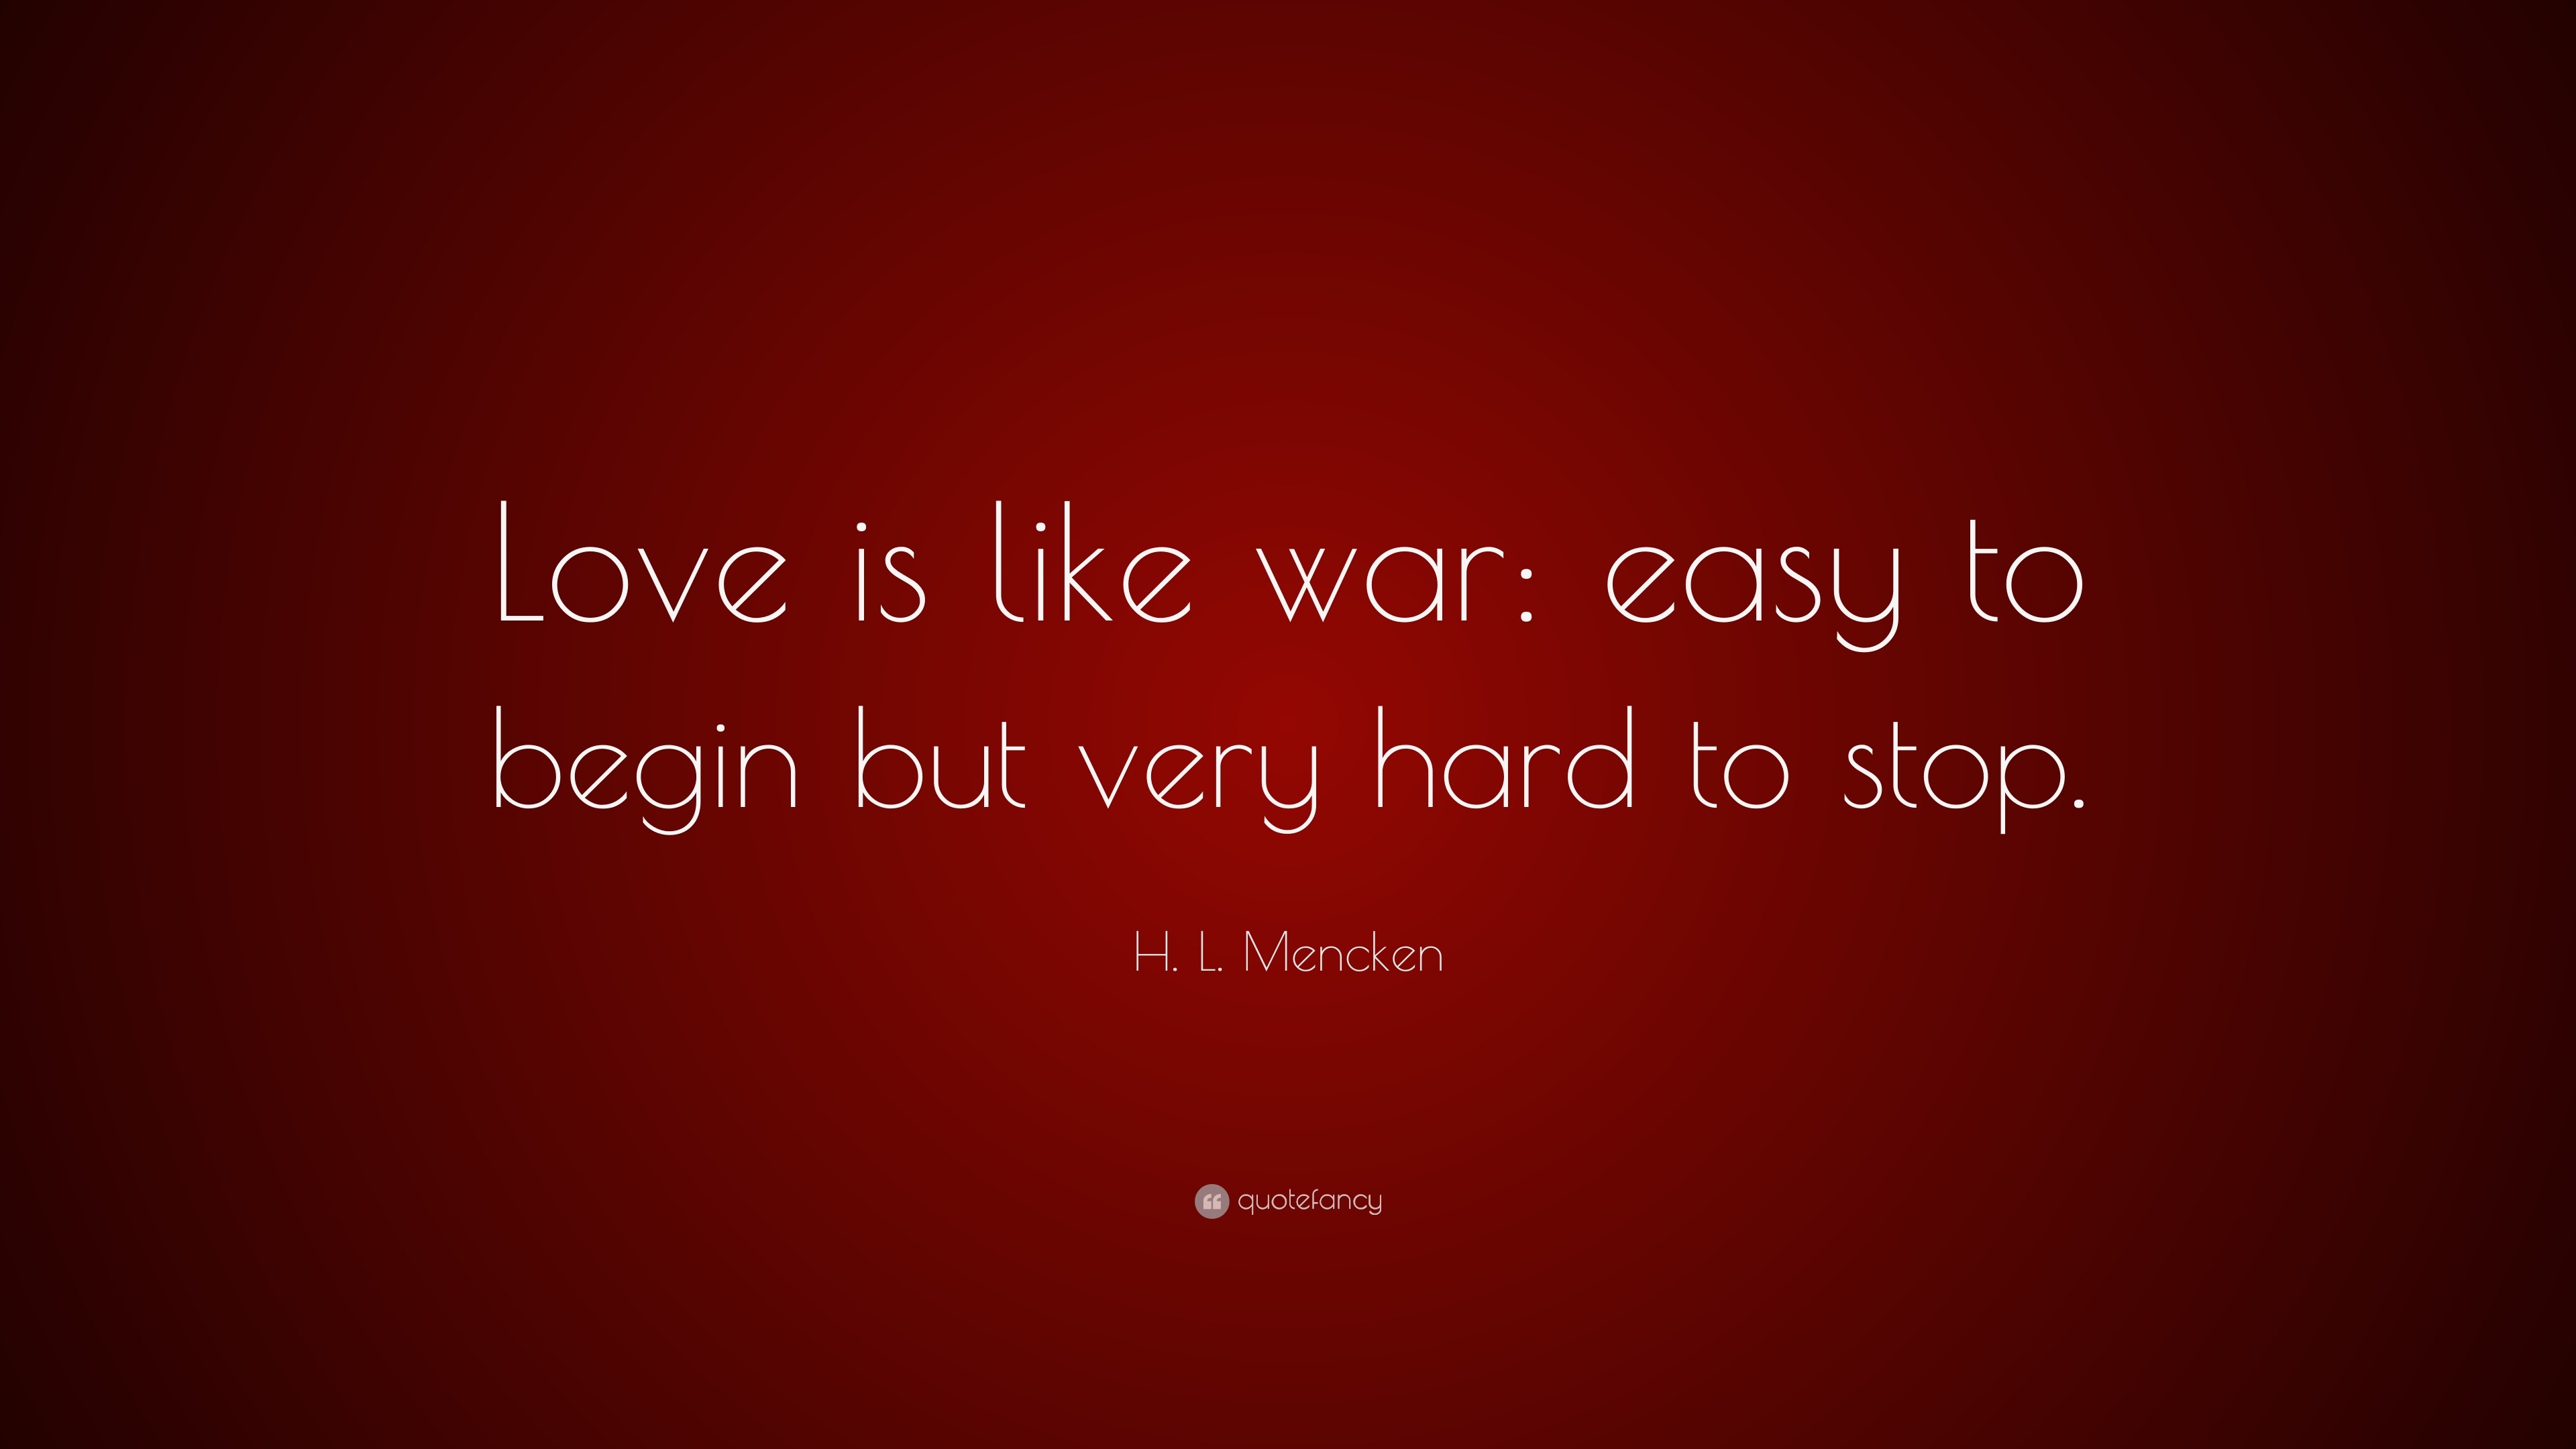 H L Mencken Quote “Love is like war easy to begin but very hard